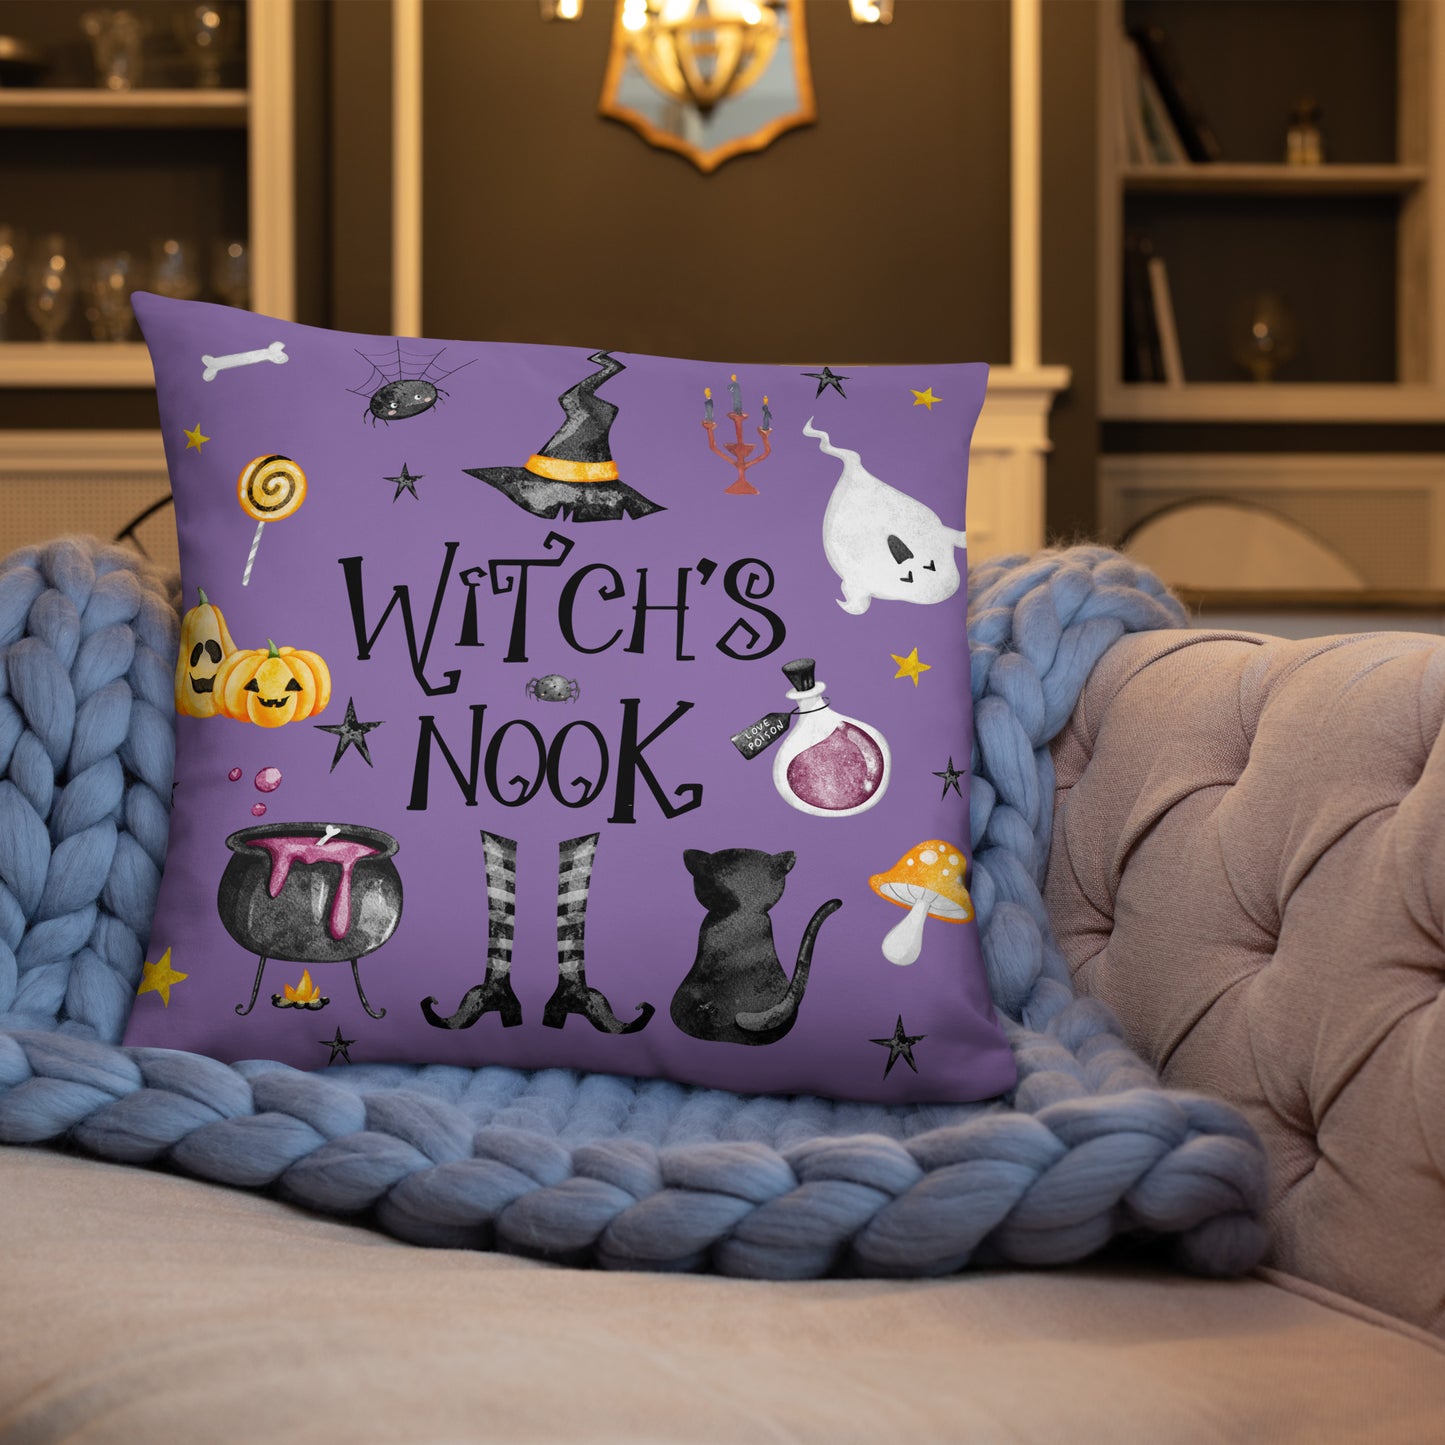 Witch's Nook Witchy Halloween Pillow